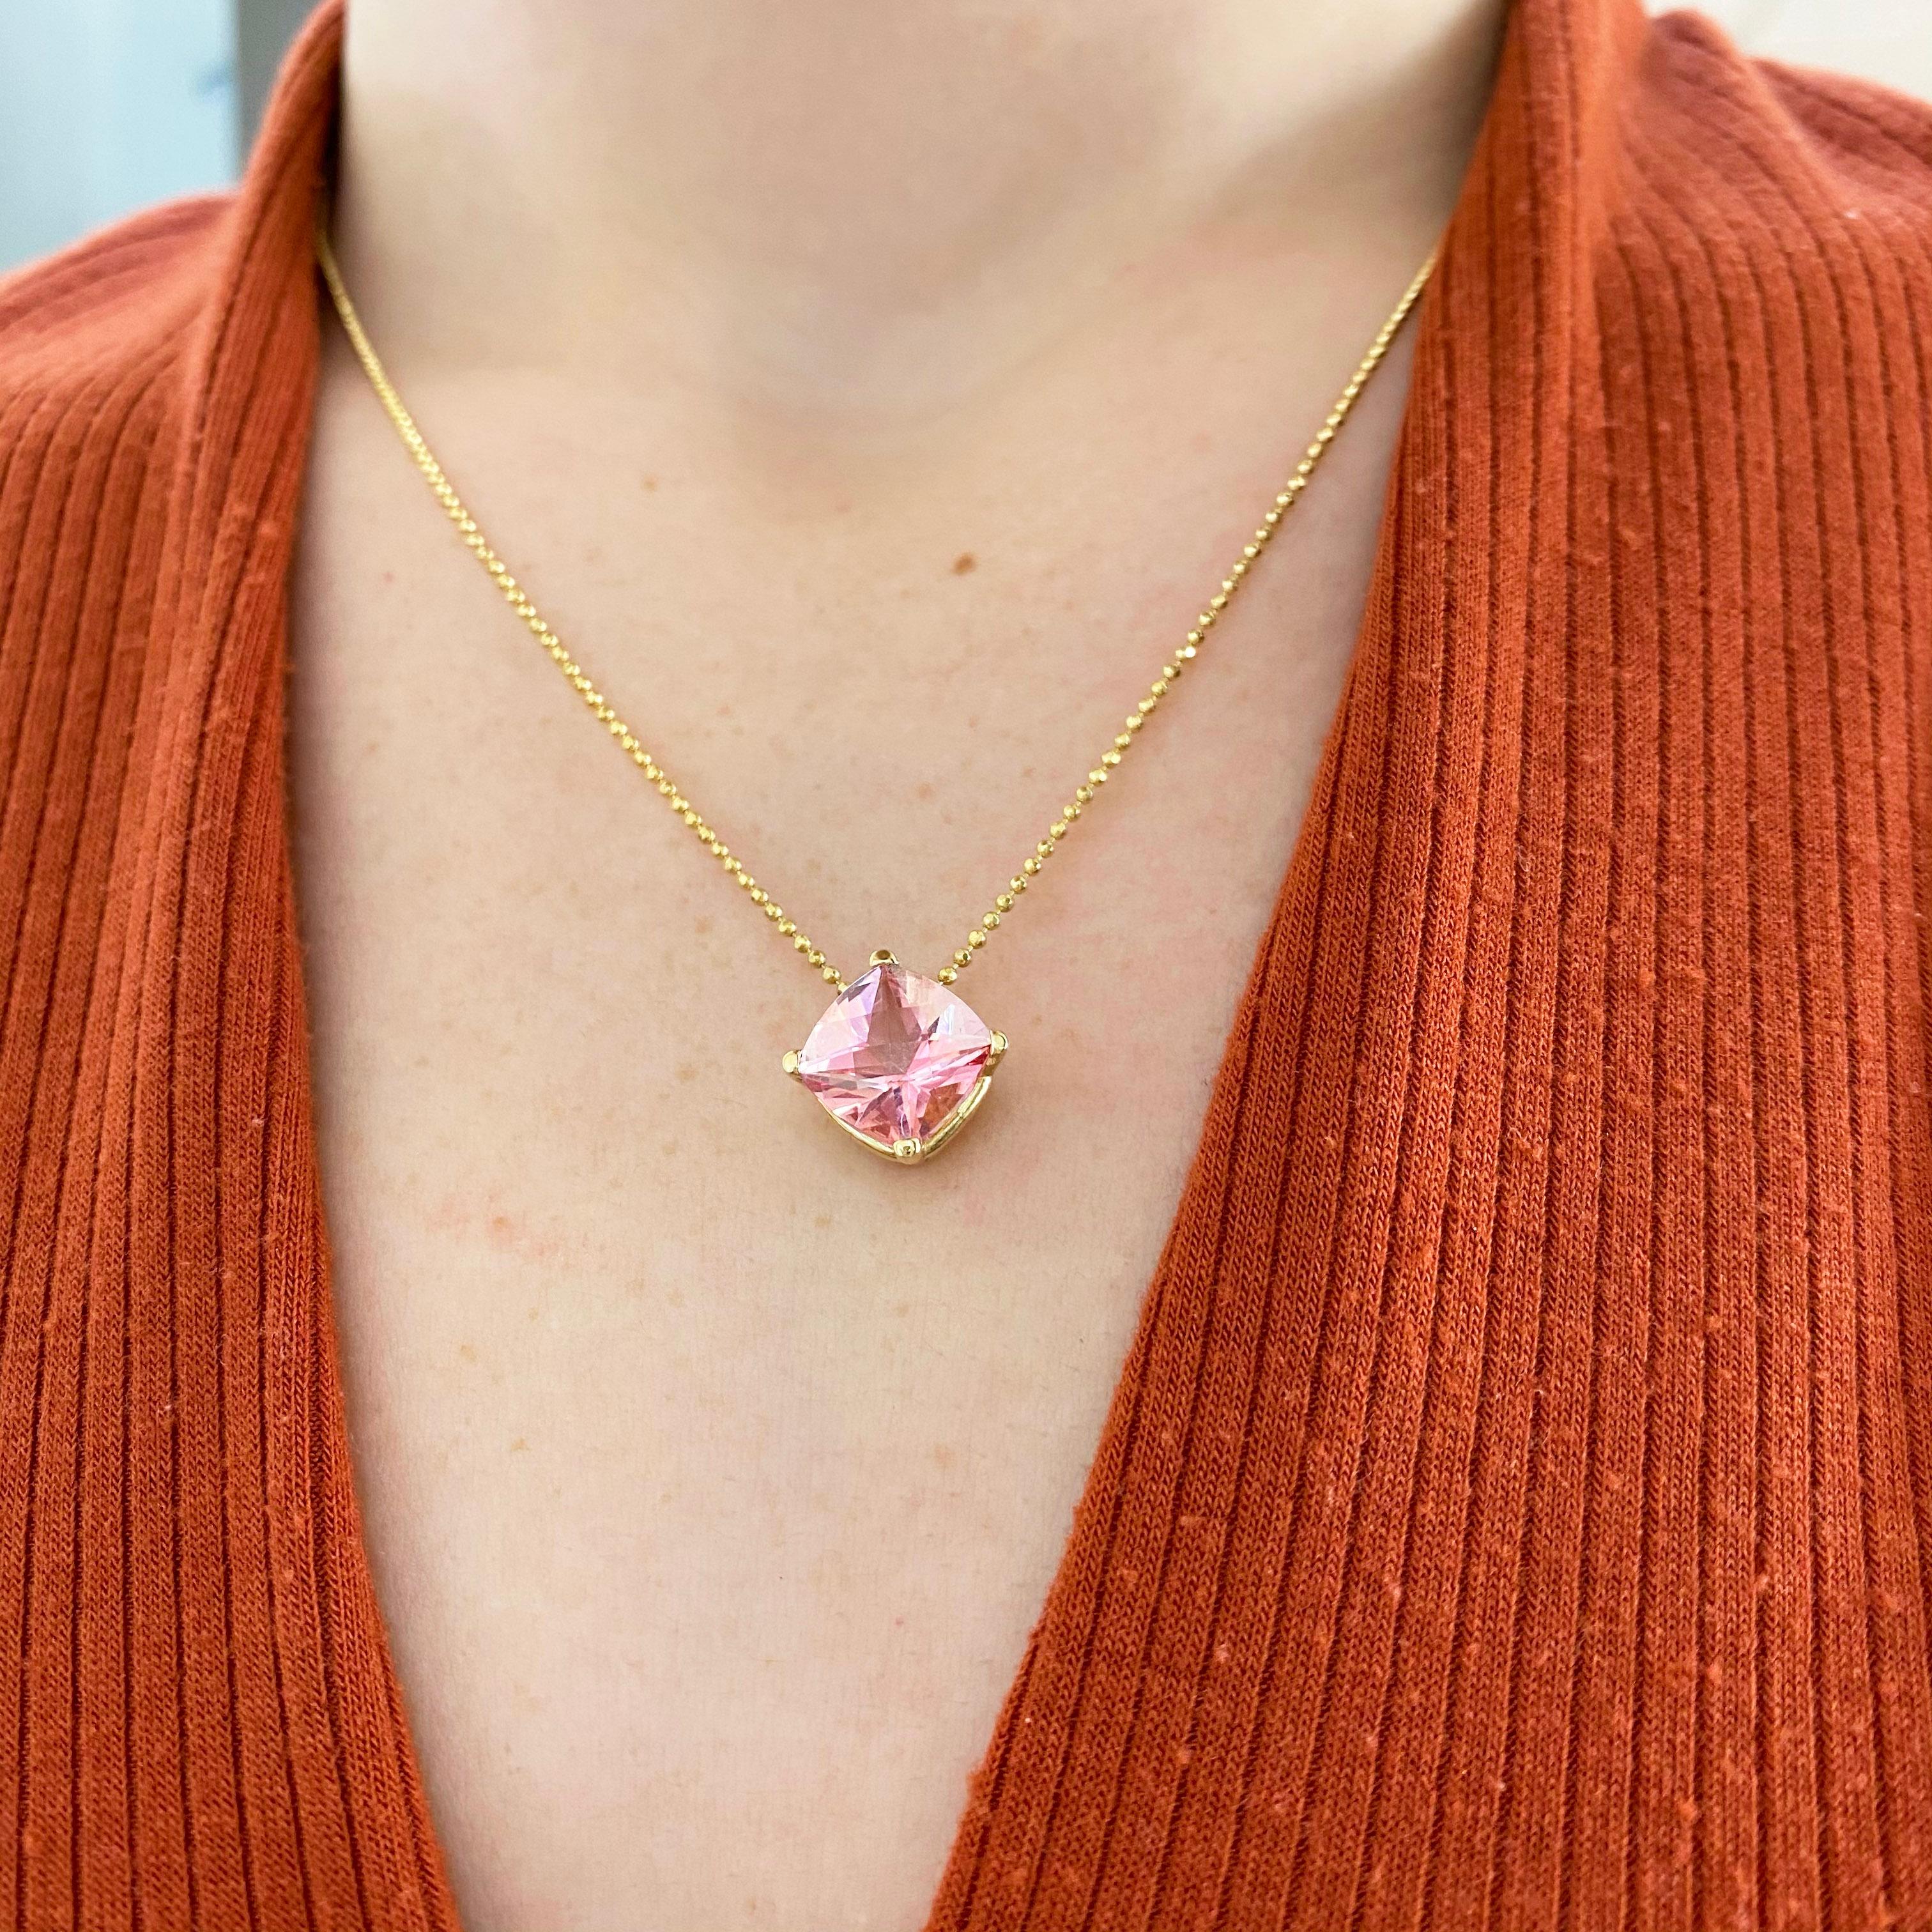 Pink Topaz Cushion Cut Gemstone with Yellow Gold Beaded Chain, Natural Genuine In New Condition For Sale In Austin, TX